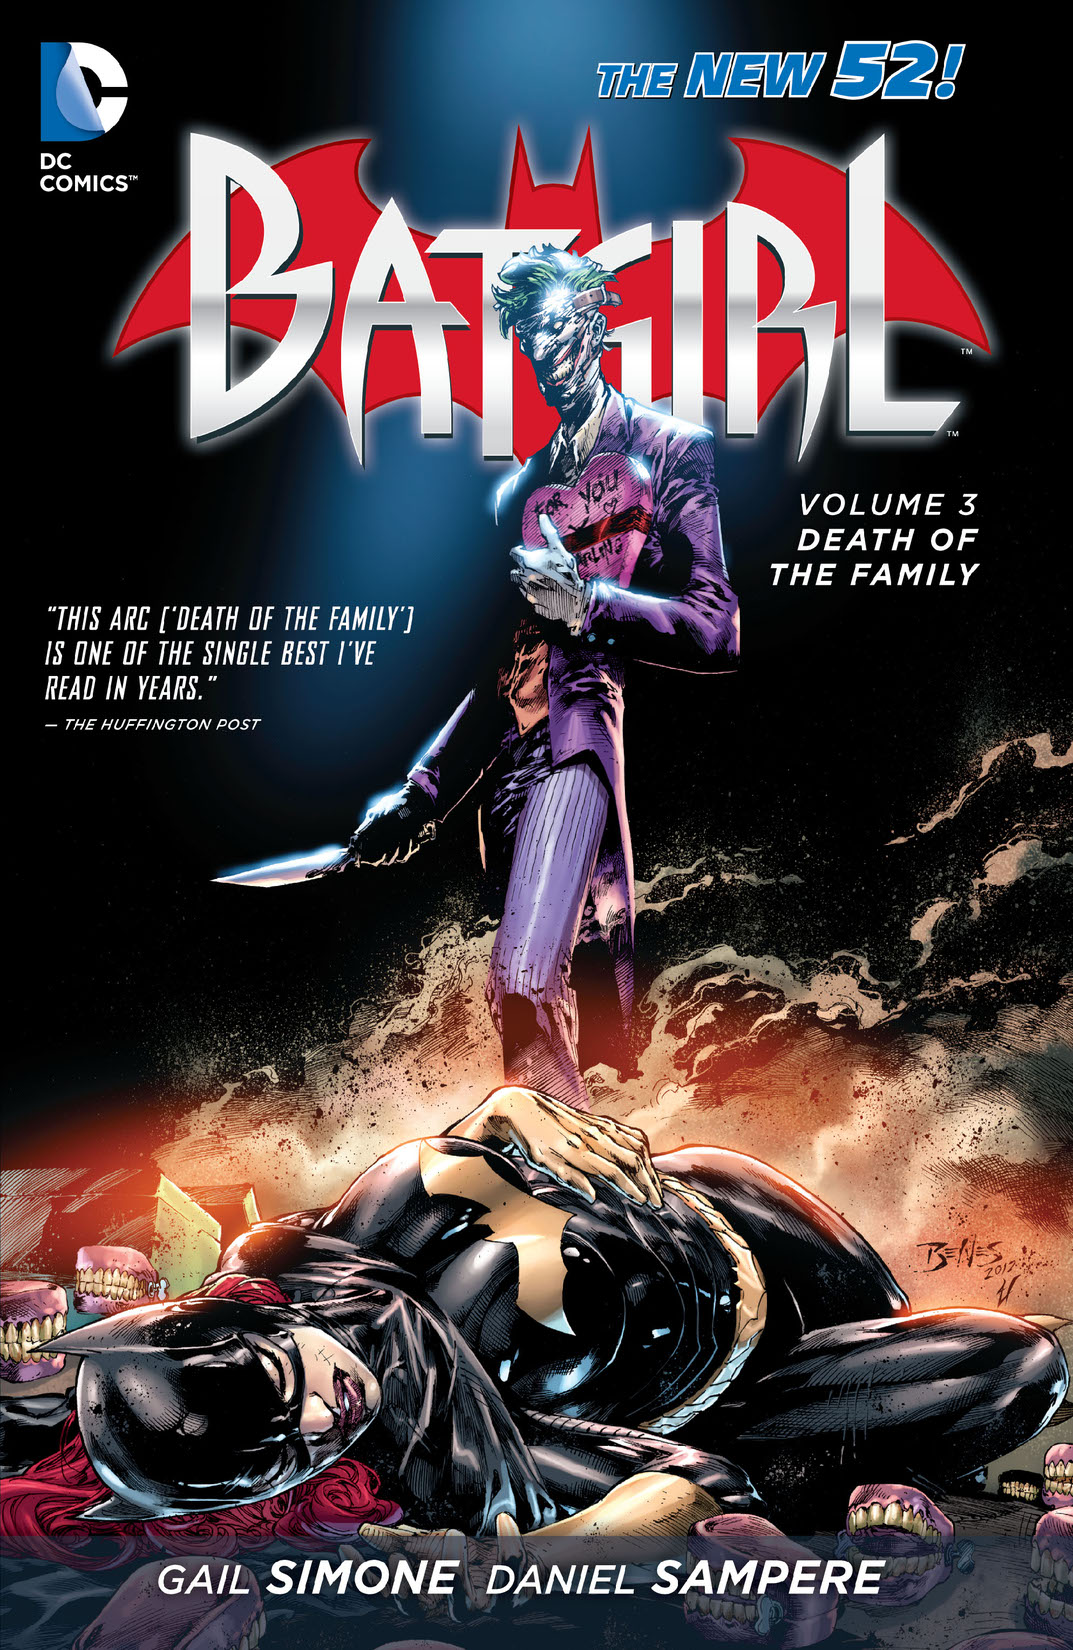 Batgirl Vol. 3: Death of the Family preview images